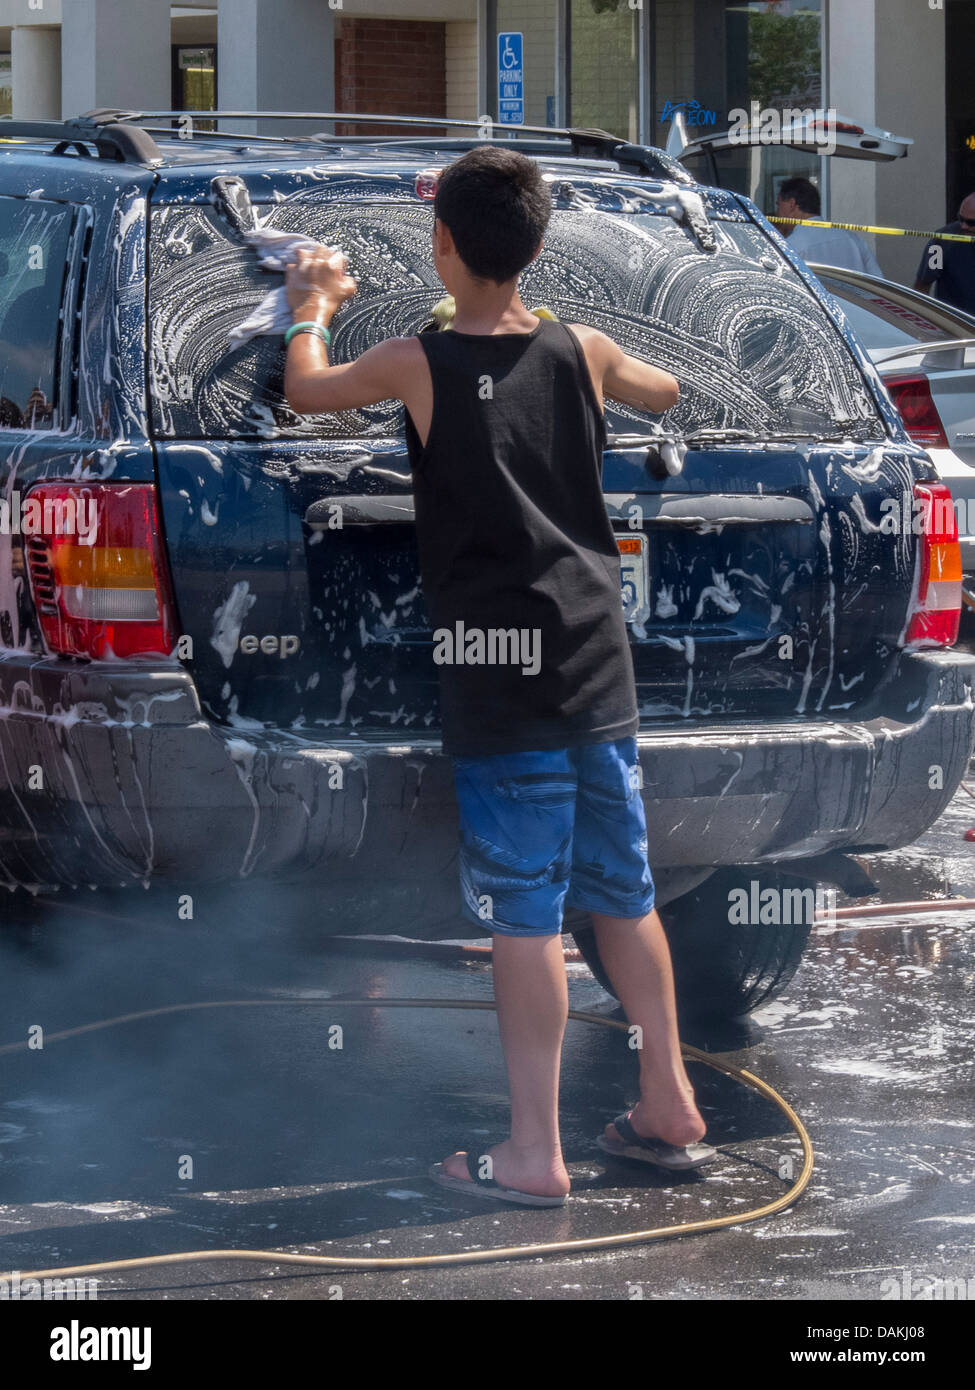 A local boy assists at a fund-raising charity car wash in a Southern California strip mall on a sunny afternoon. Stock Photo